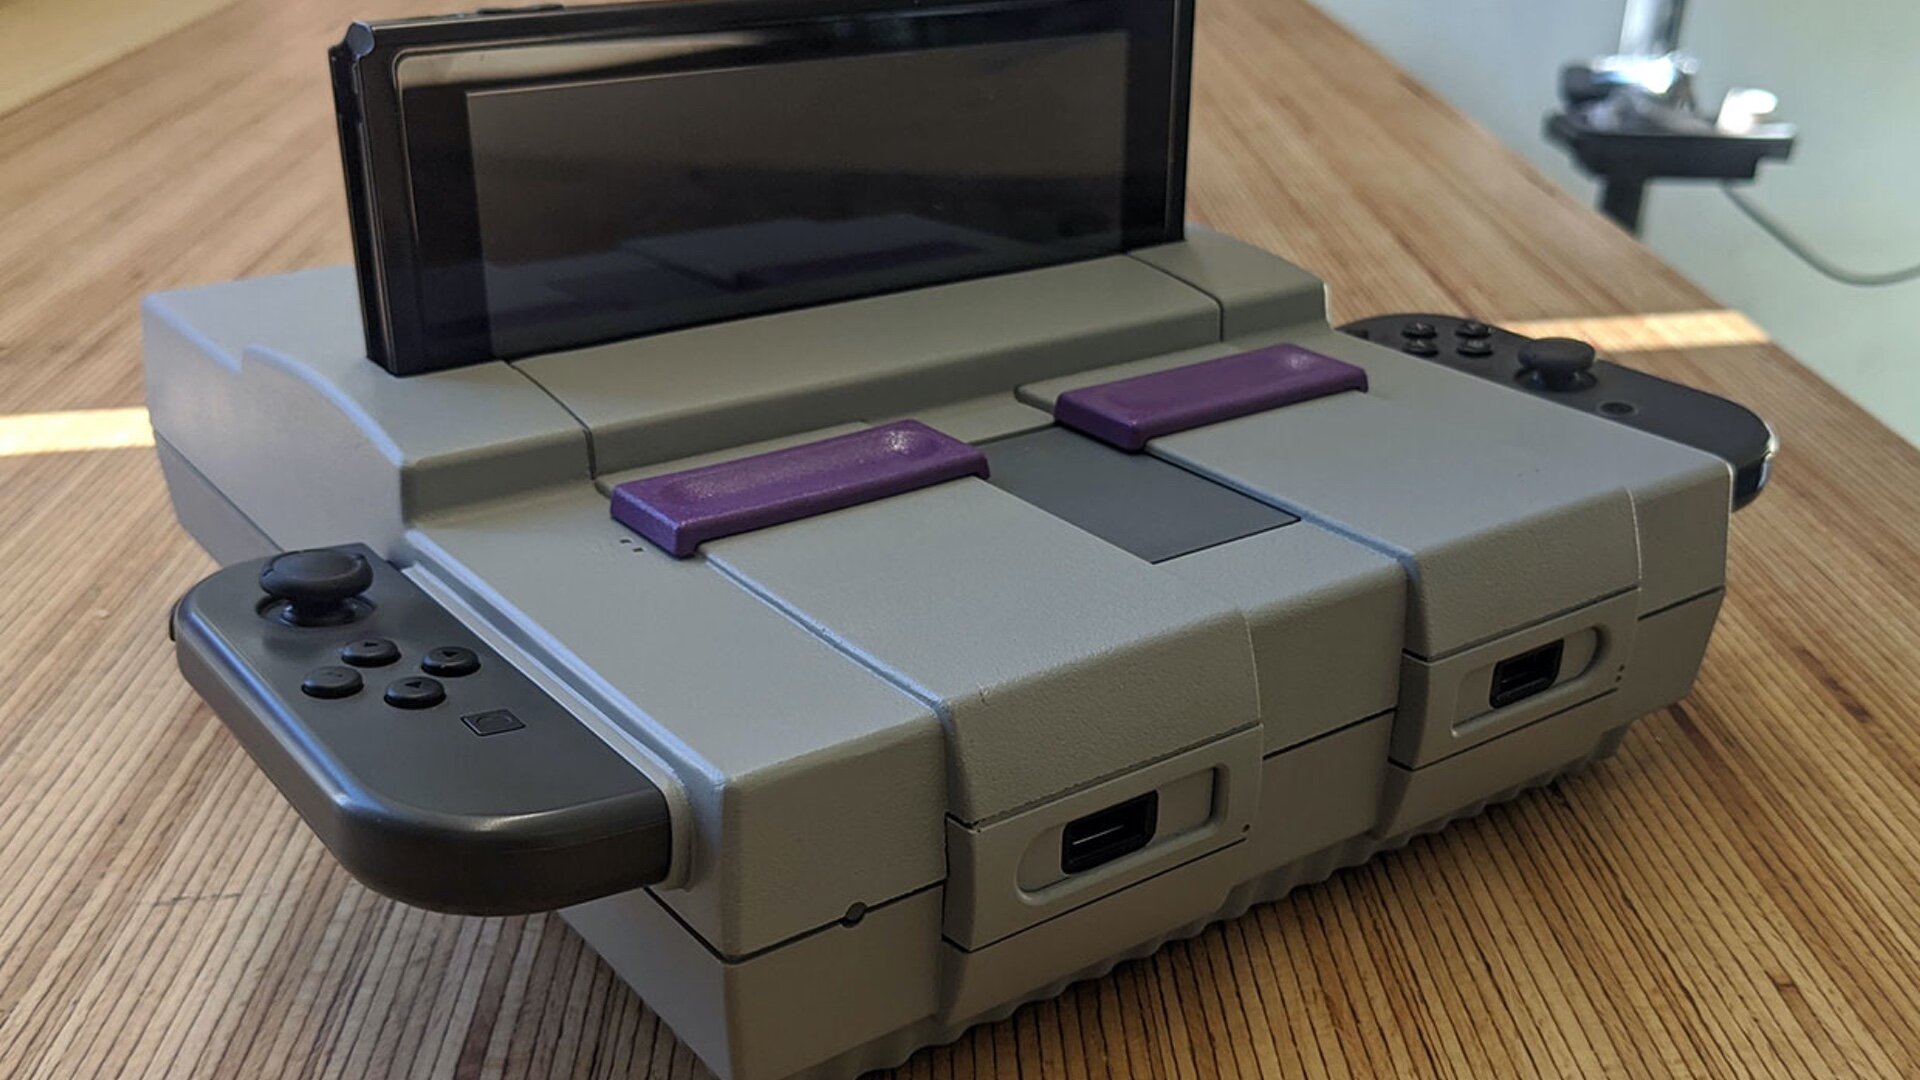 This Super Nintendo Console is Awesome Nintendo Switch Dock — GeekTyrant